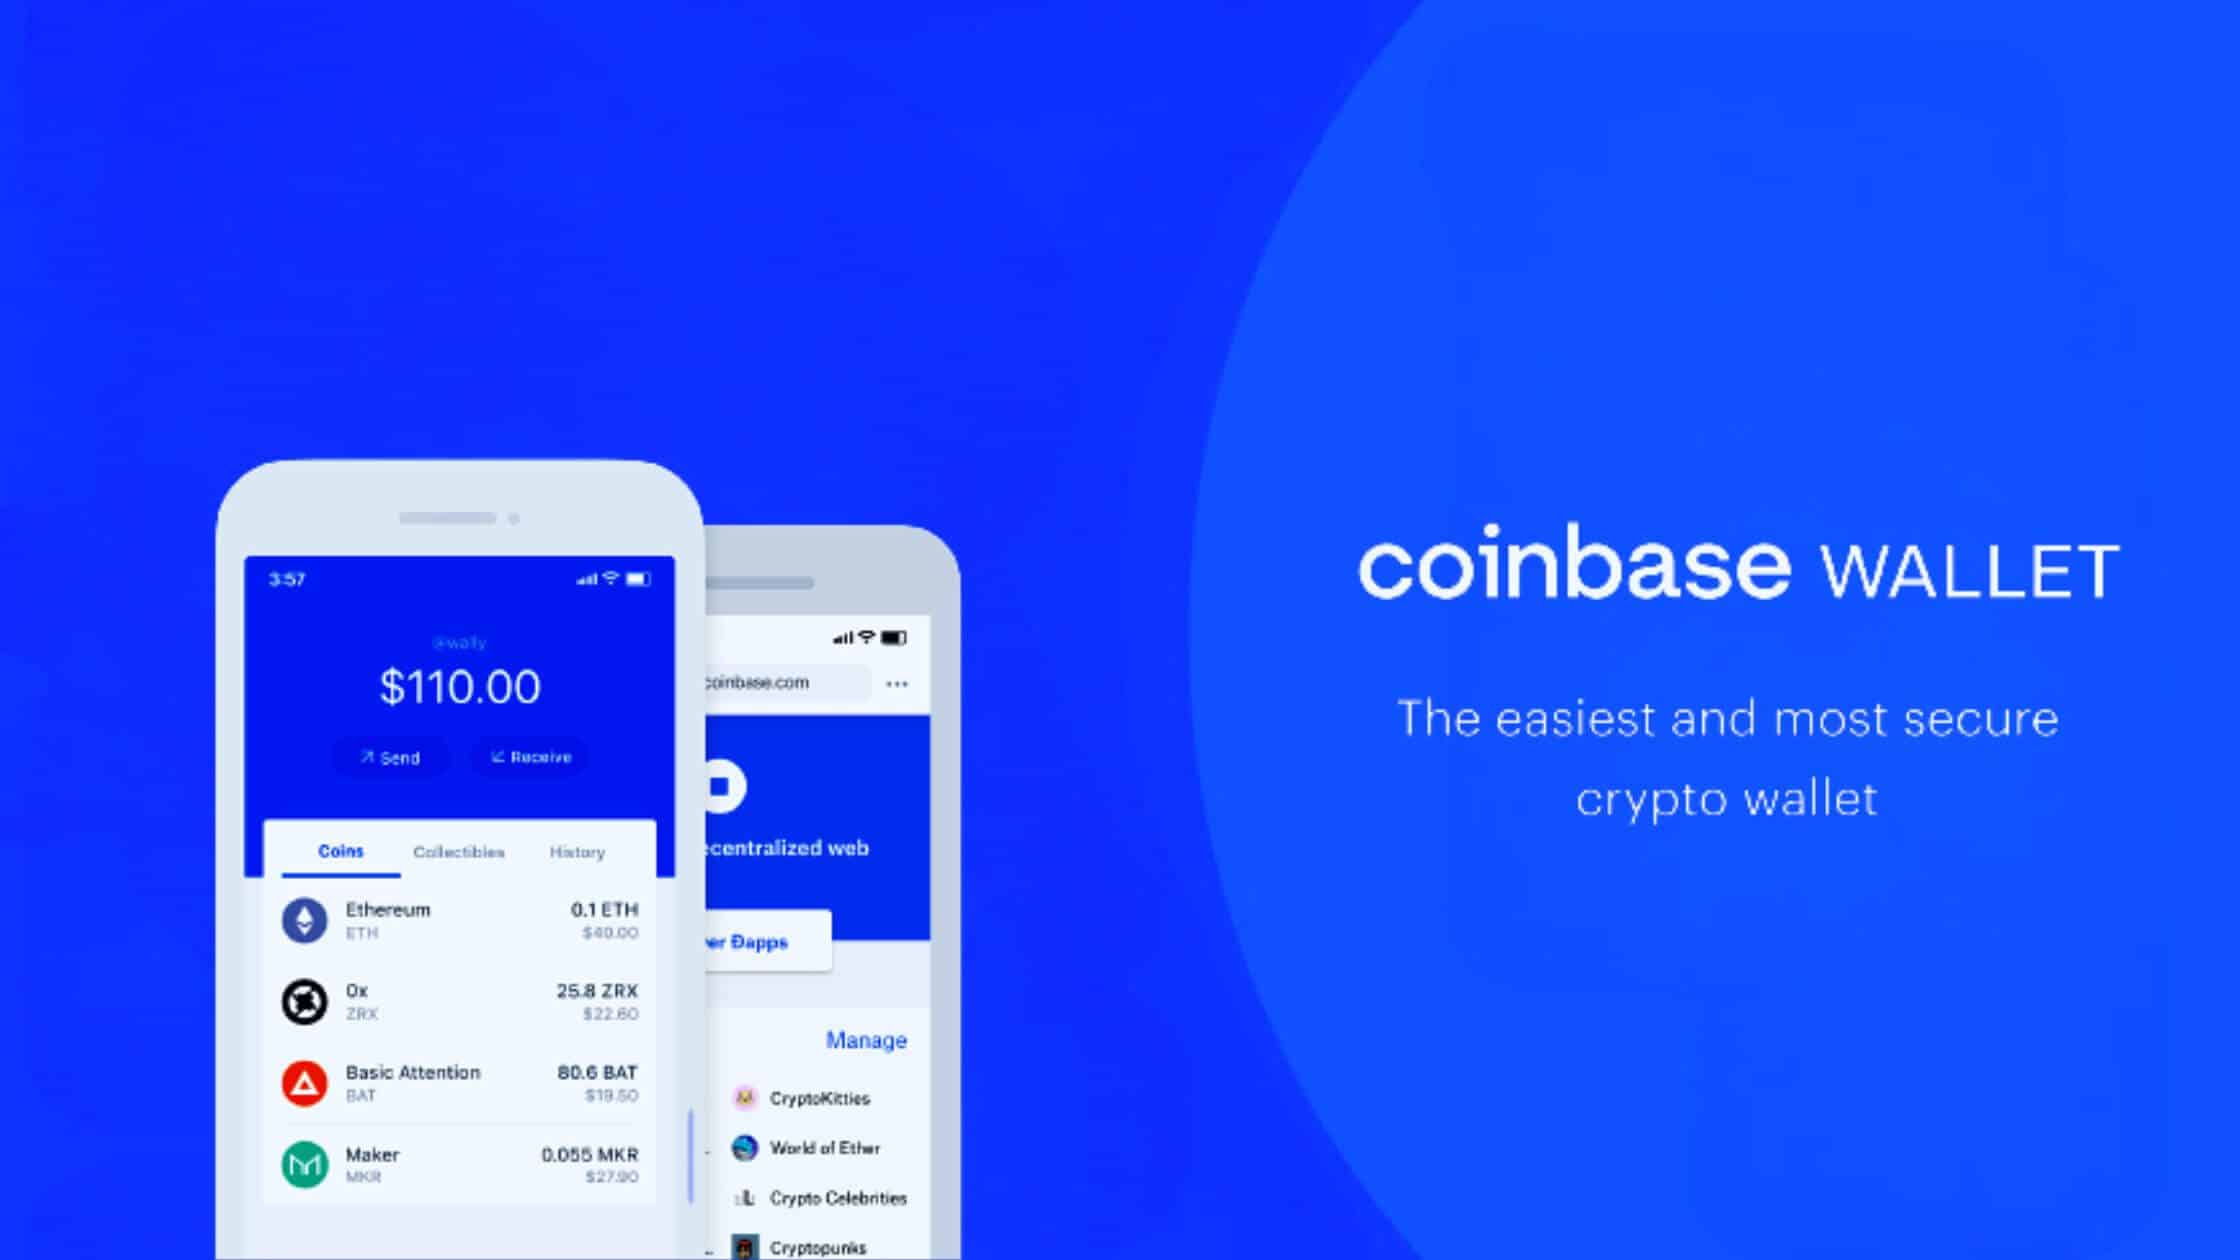 About Coinbase